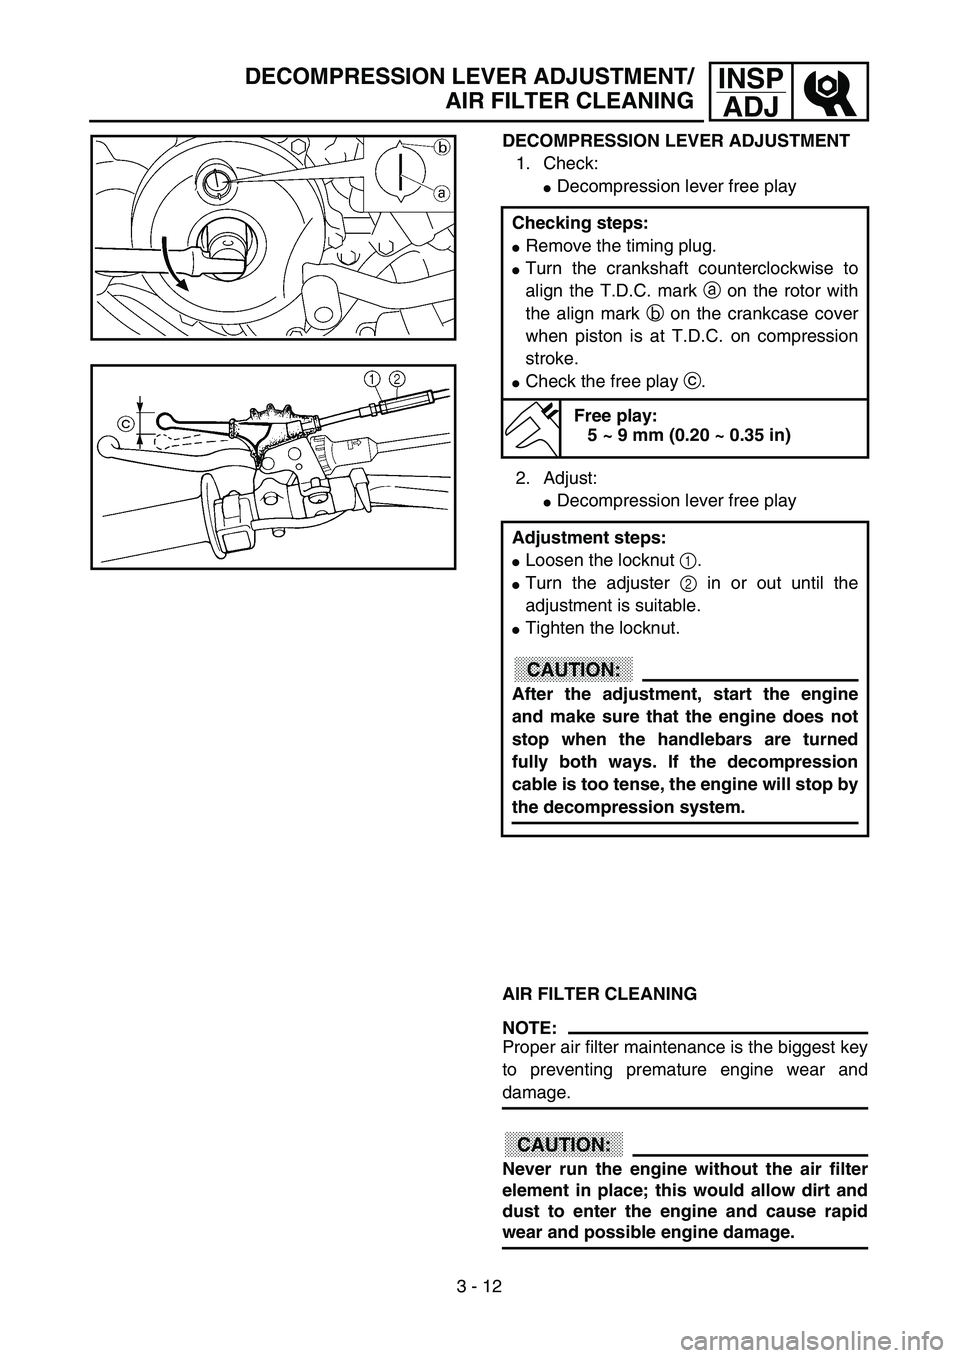 YAMAHA WR 426F 2002  Owners Manual 3 - 12
INSP
ADJDECOMPRESSION LEVER ADJUSTMENT/
AIR FILTER CLEANING
DECOMPRESSION LEVER ADJUSTMENT
1. Check:
Decompression lever free play
2. Adjust:
Decompression lever free play
AIR FILTER CLEANING